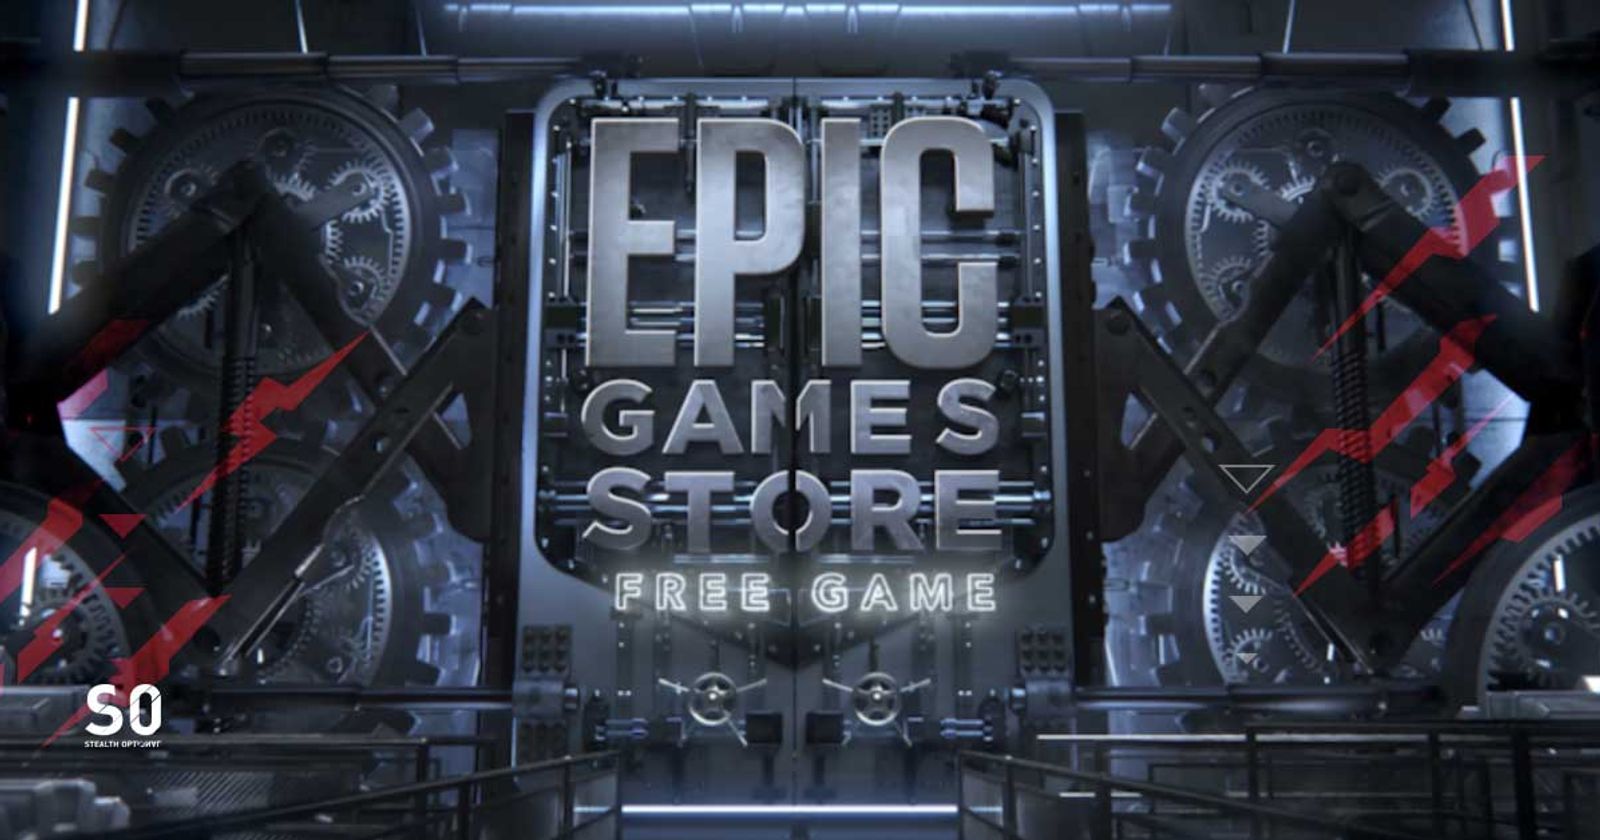 How To Claim 15 Free Games From The Epic Games Store! 